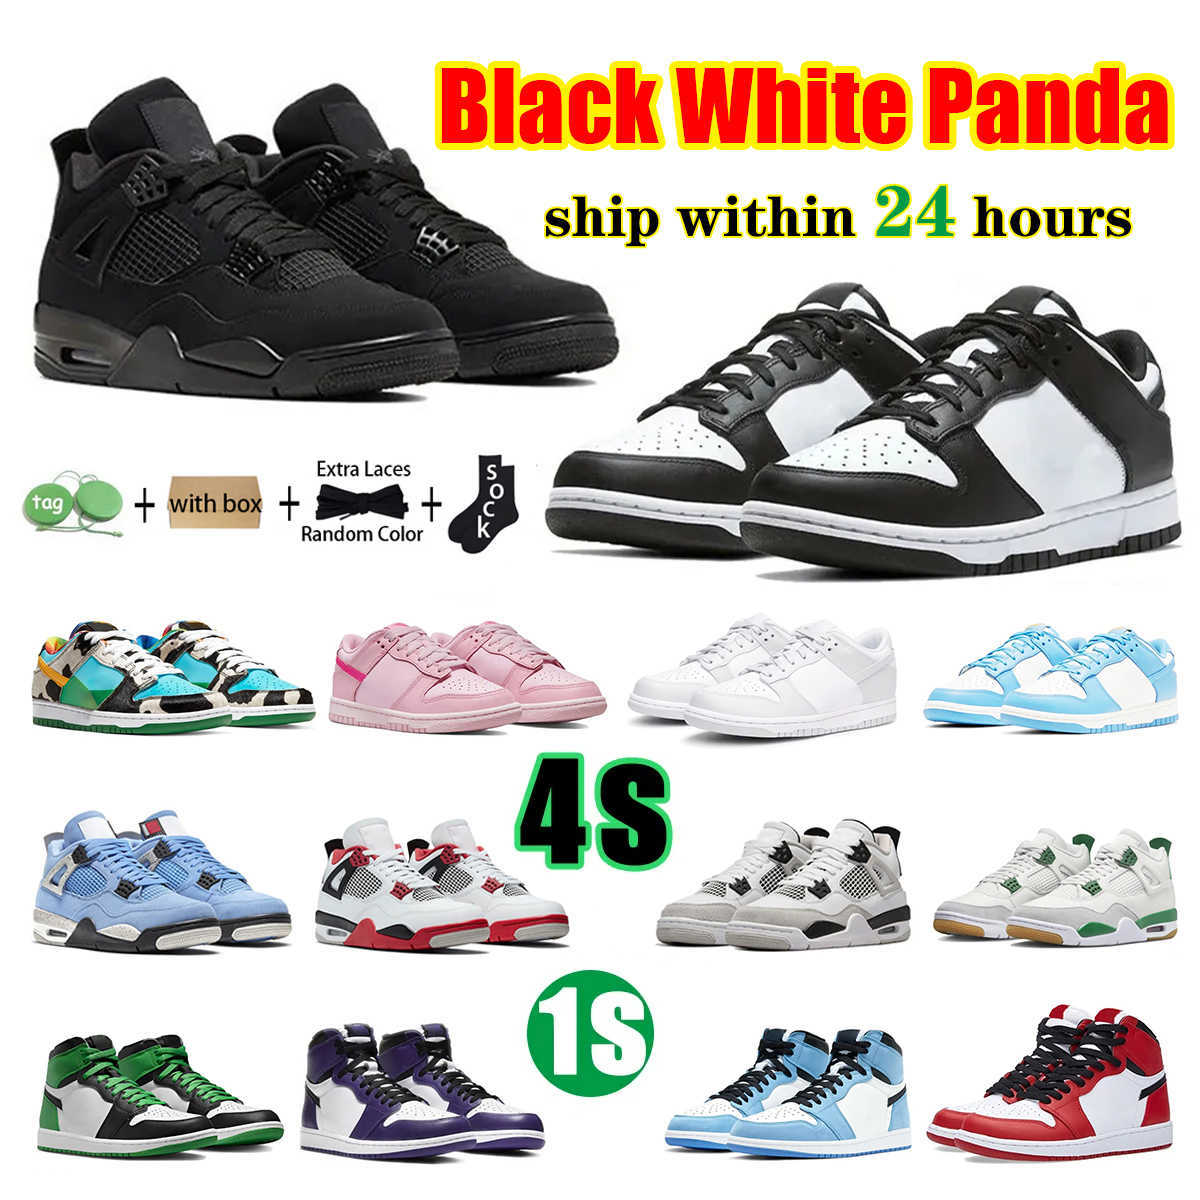 

Panda 4s Basketball Shoes Jumpman 1s designer shoes sneakers womens trainers mens White Black Cat Argon Medium Olive Unc Chicago Lost And Found dhgate NEW, 33